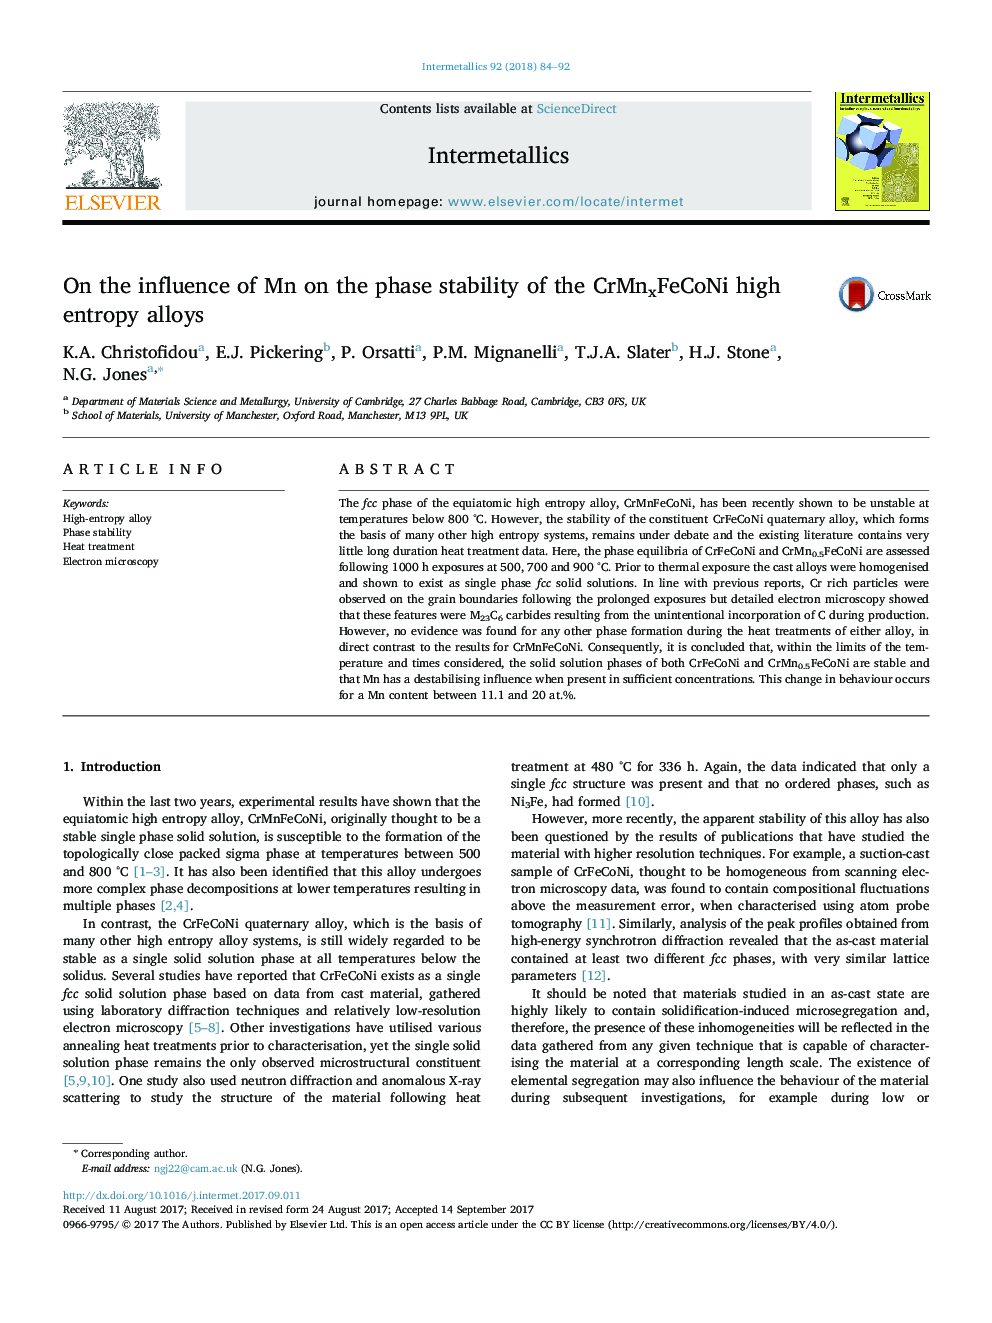 On the influence of Mn on the phase stability of the CrMnxFeCoNi high entropy alloys